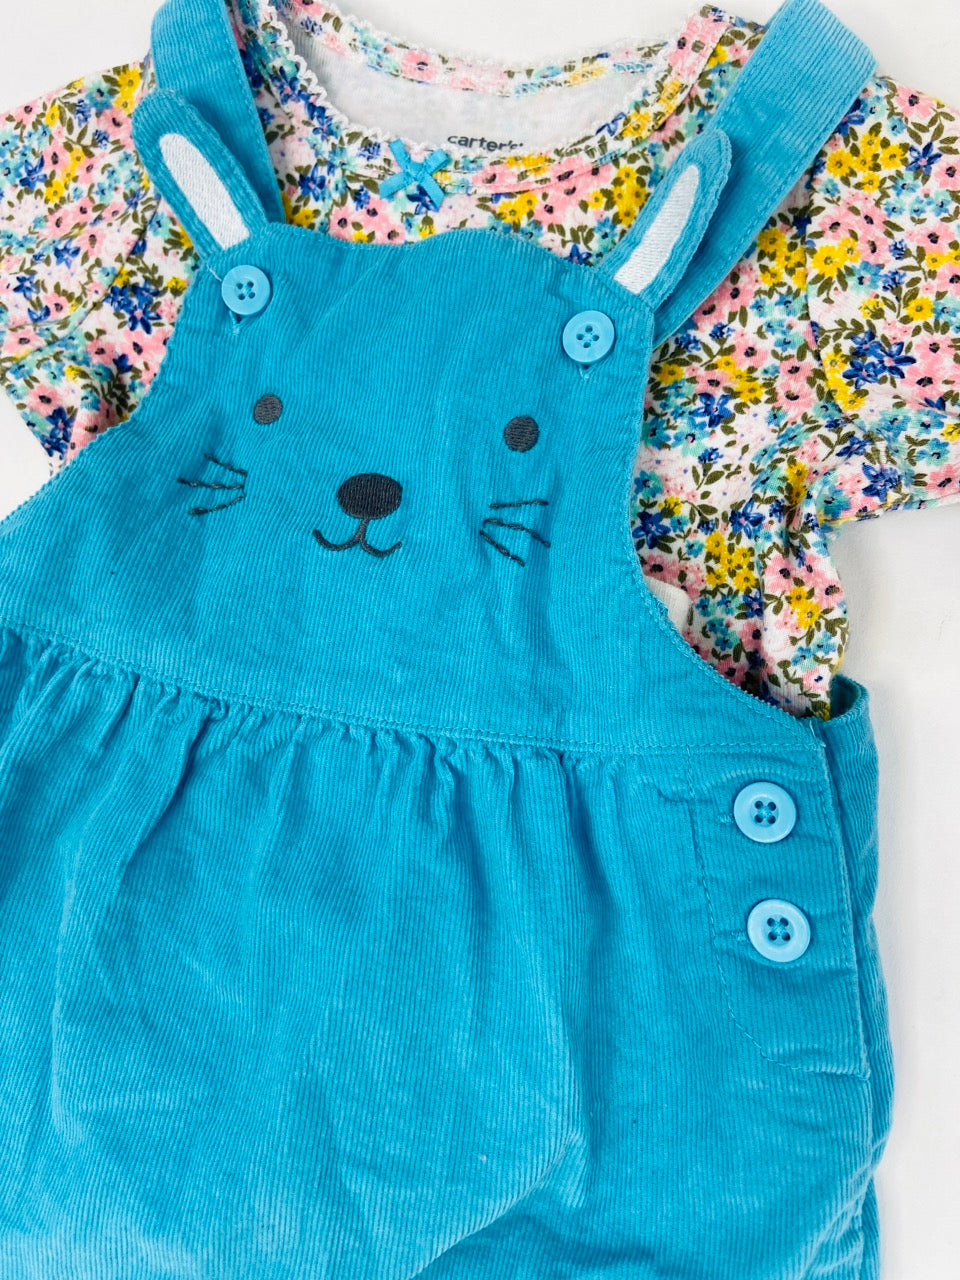 Rust Denim Dress Overall | MILKBARN Kids | Organic and Bamboo Baby Clothes  and Gifts